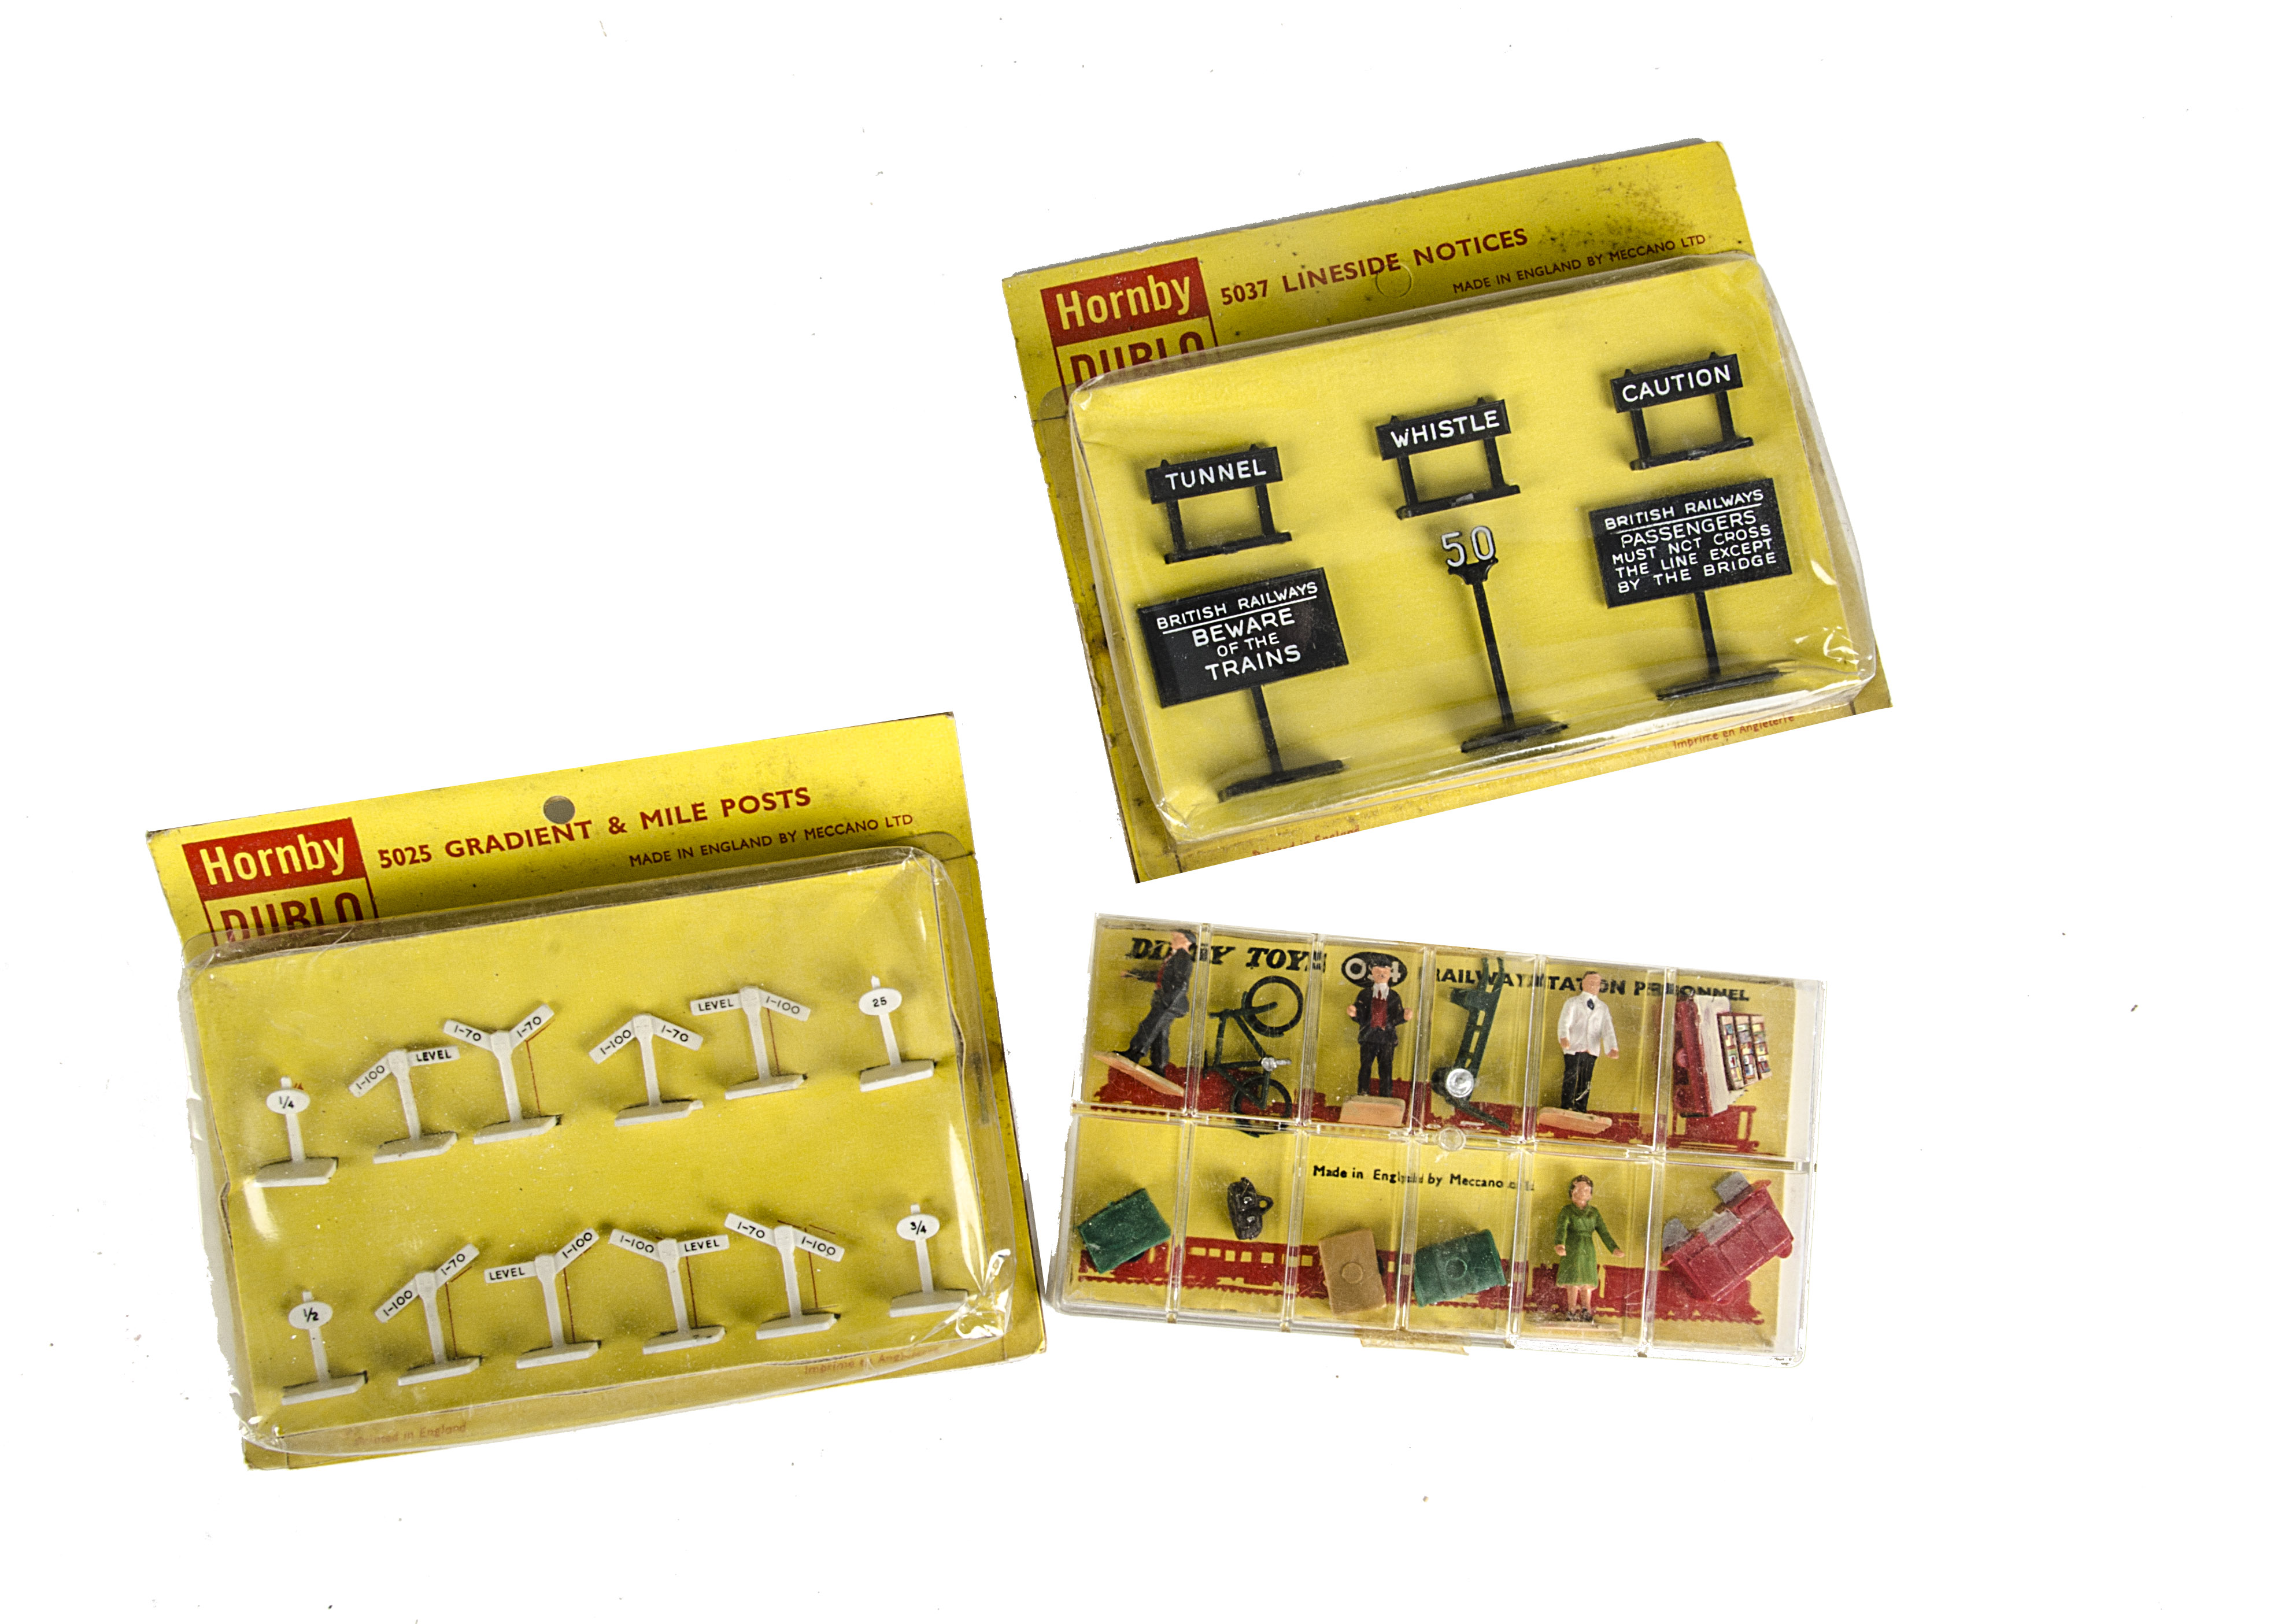 Hornby-Dublo 00 Gauge Accessory Packs, 054 Railway Station Personnel with two suitcases, in original